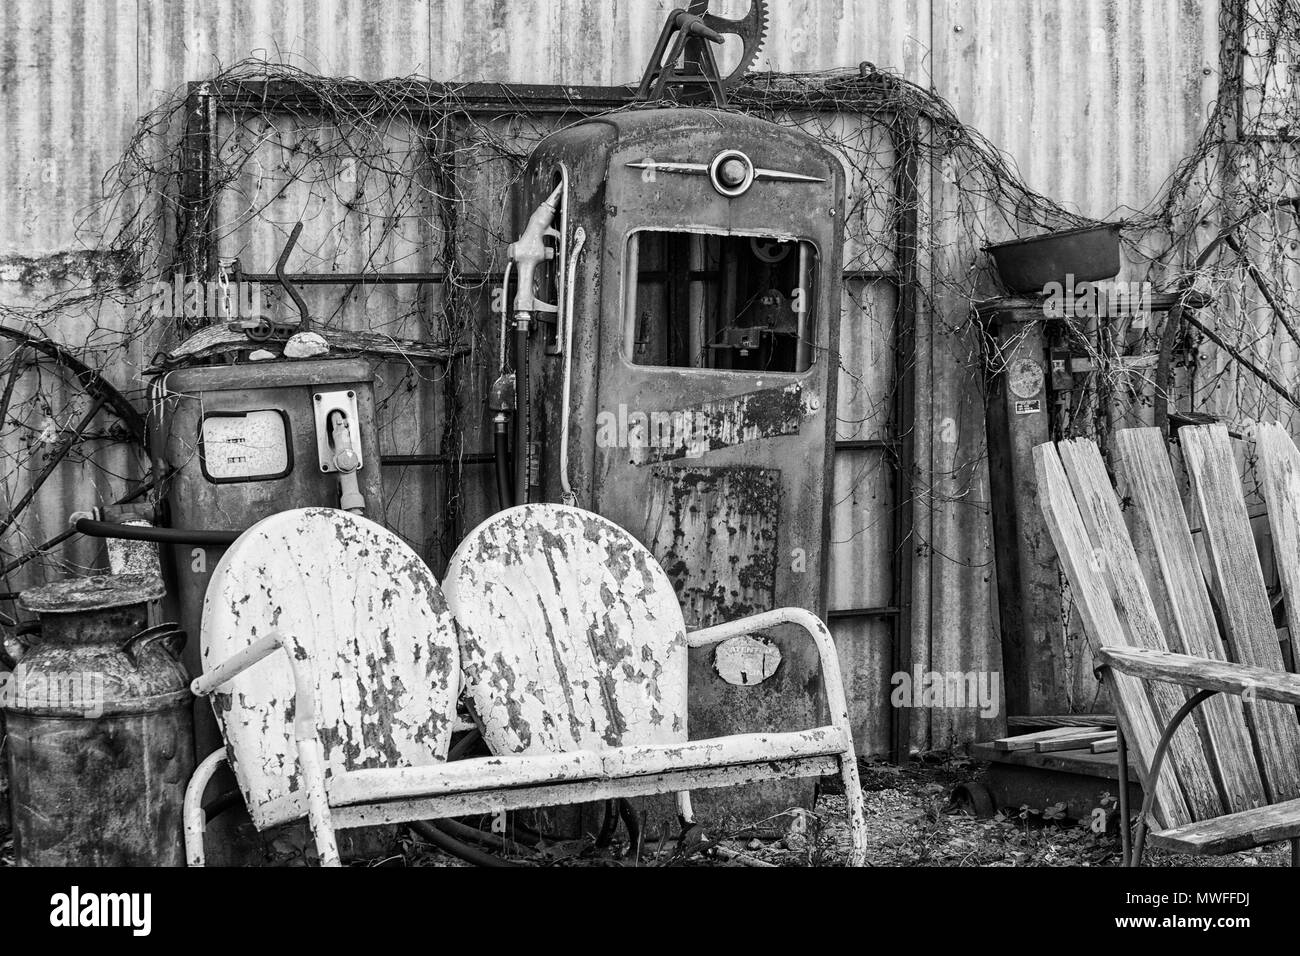 Front entrance with abandoned junk at The Shack Up Inn cotton sharecroppers theme hotel, Clarksdale, Mississippi, USA. In black and white Stock Photo